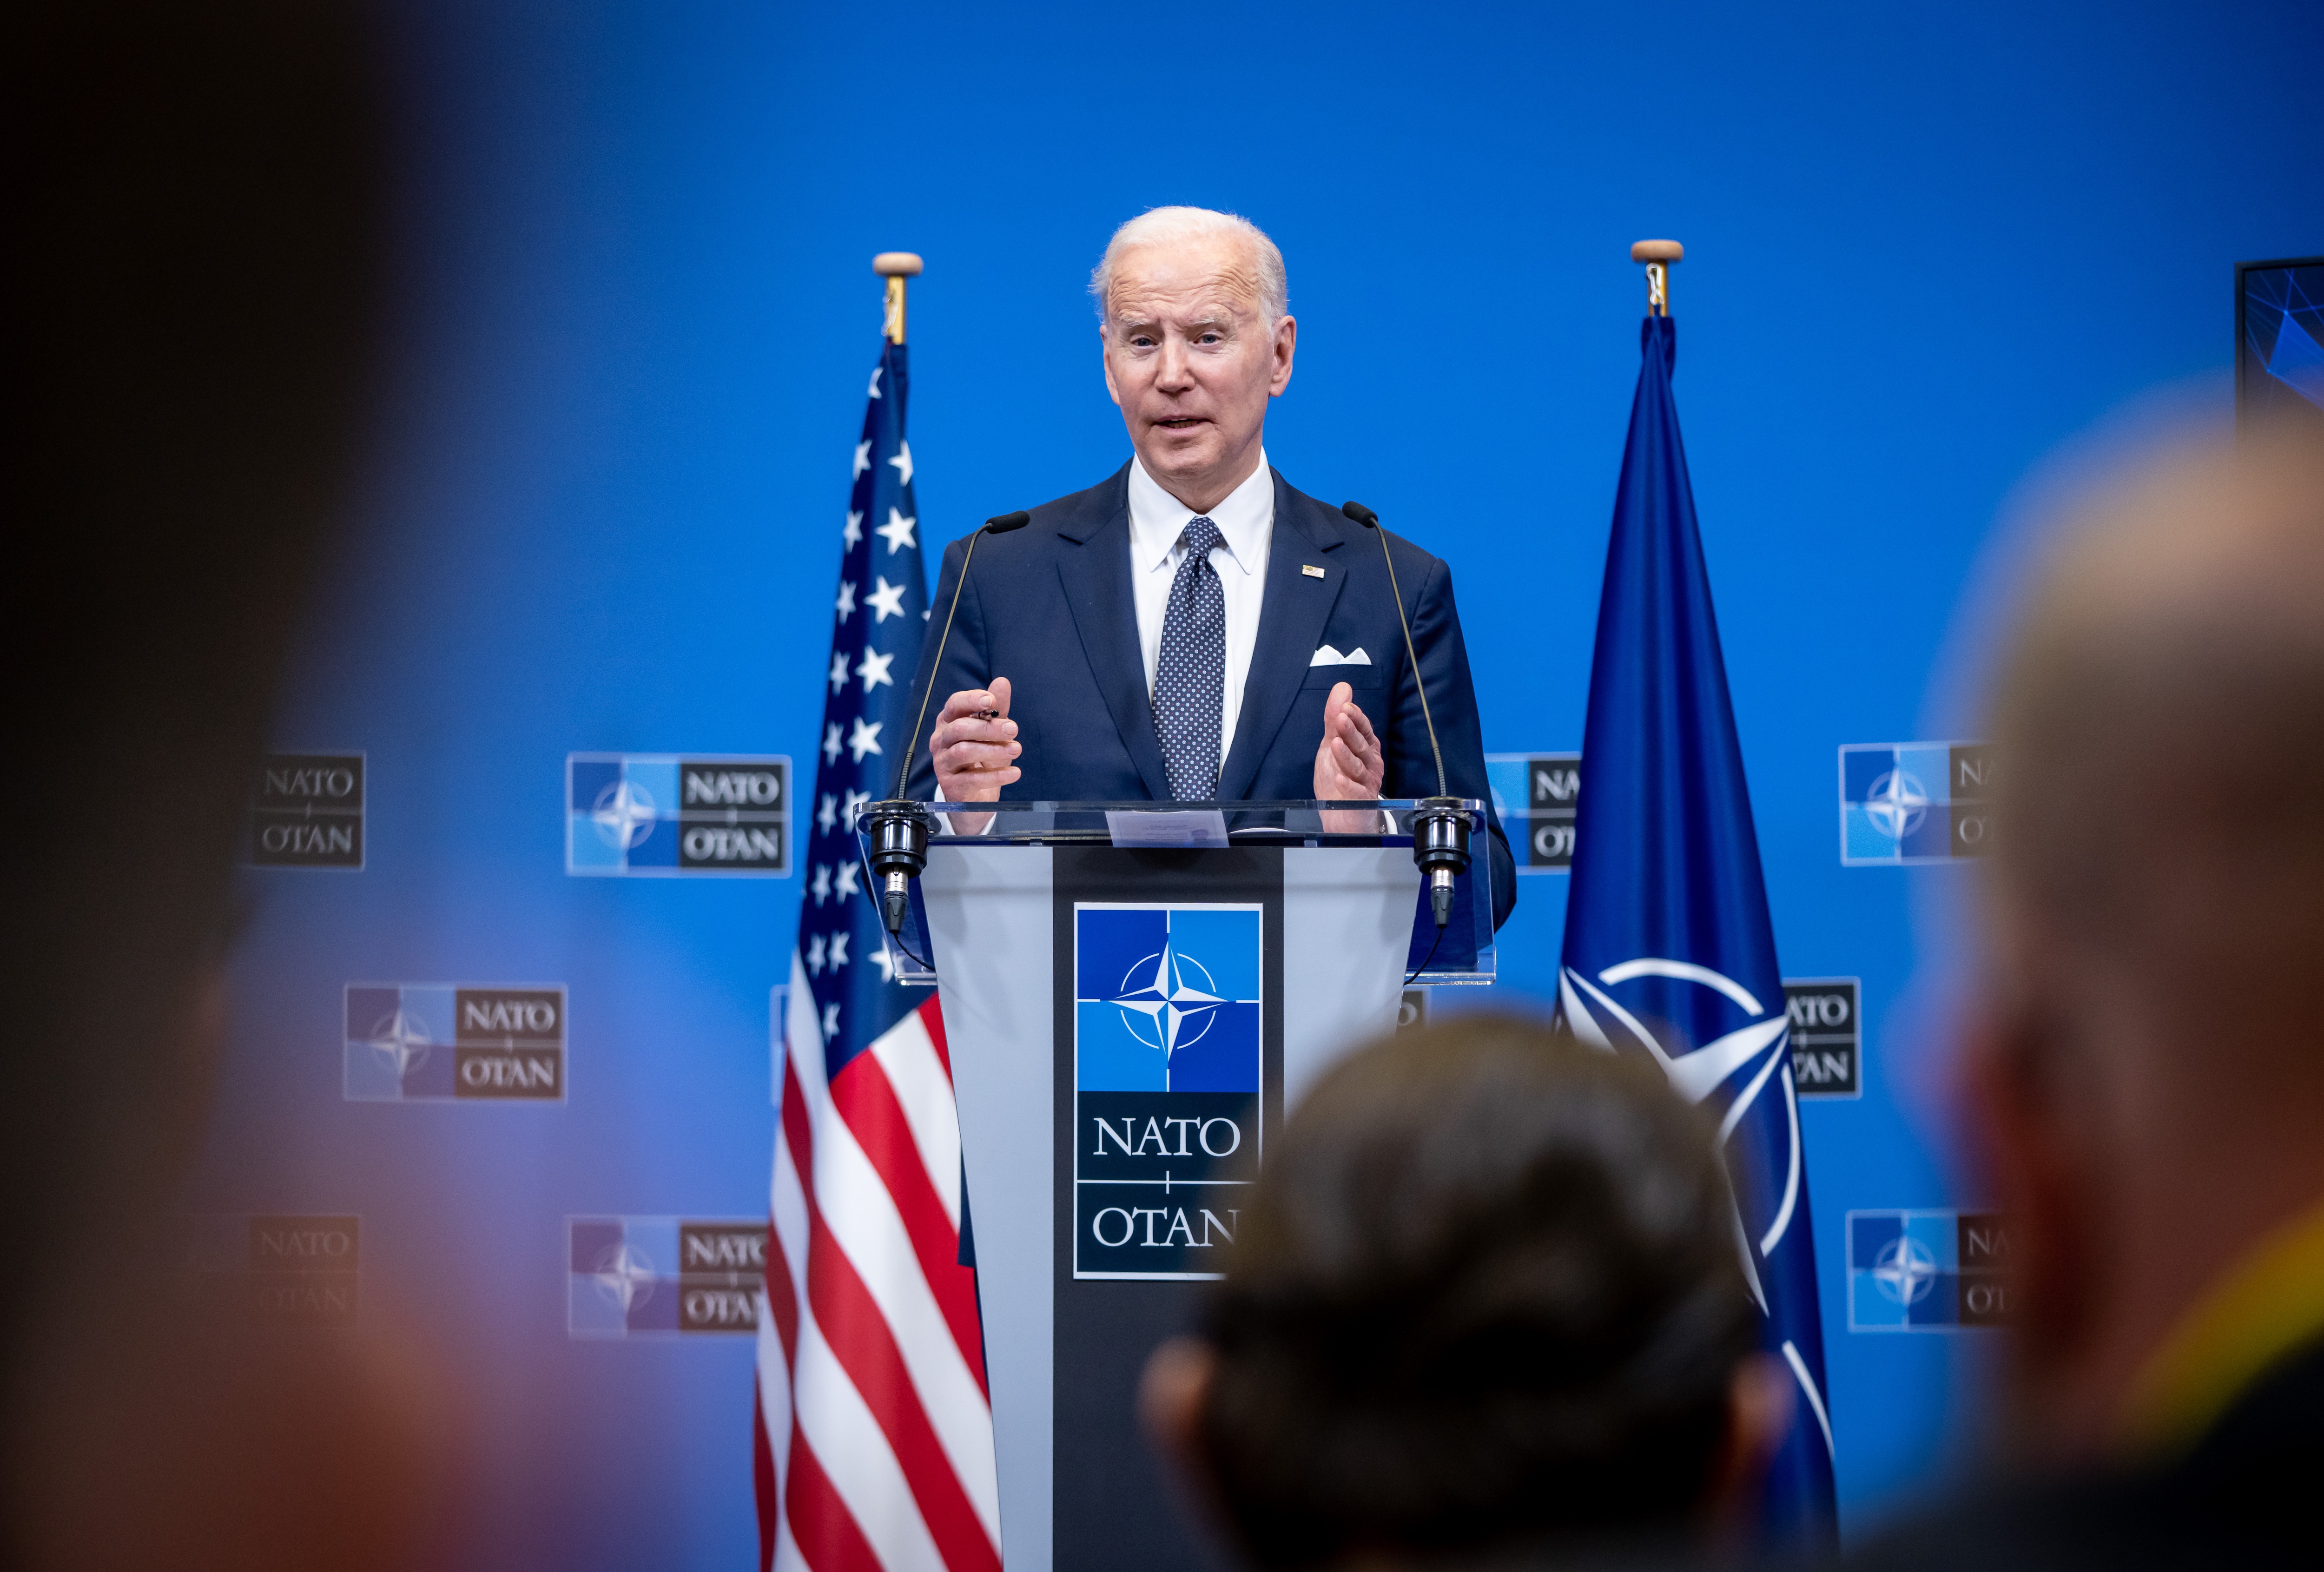 U.S. President Joe Biden attends a press conference after the special NATO summit at NATO headquarters in Brussels, Belgium, on March 24.